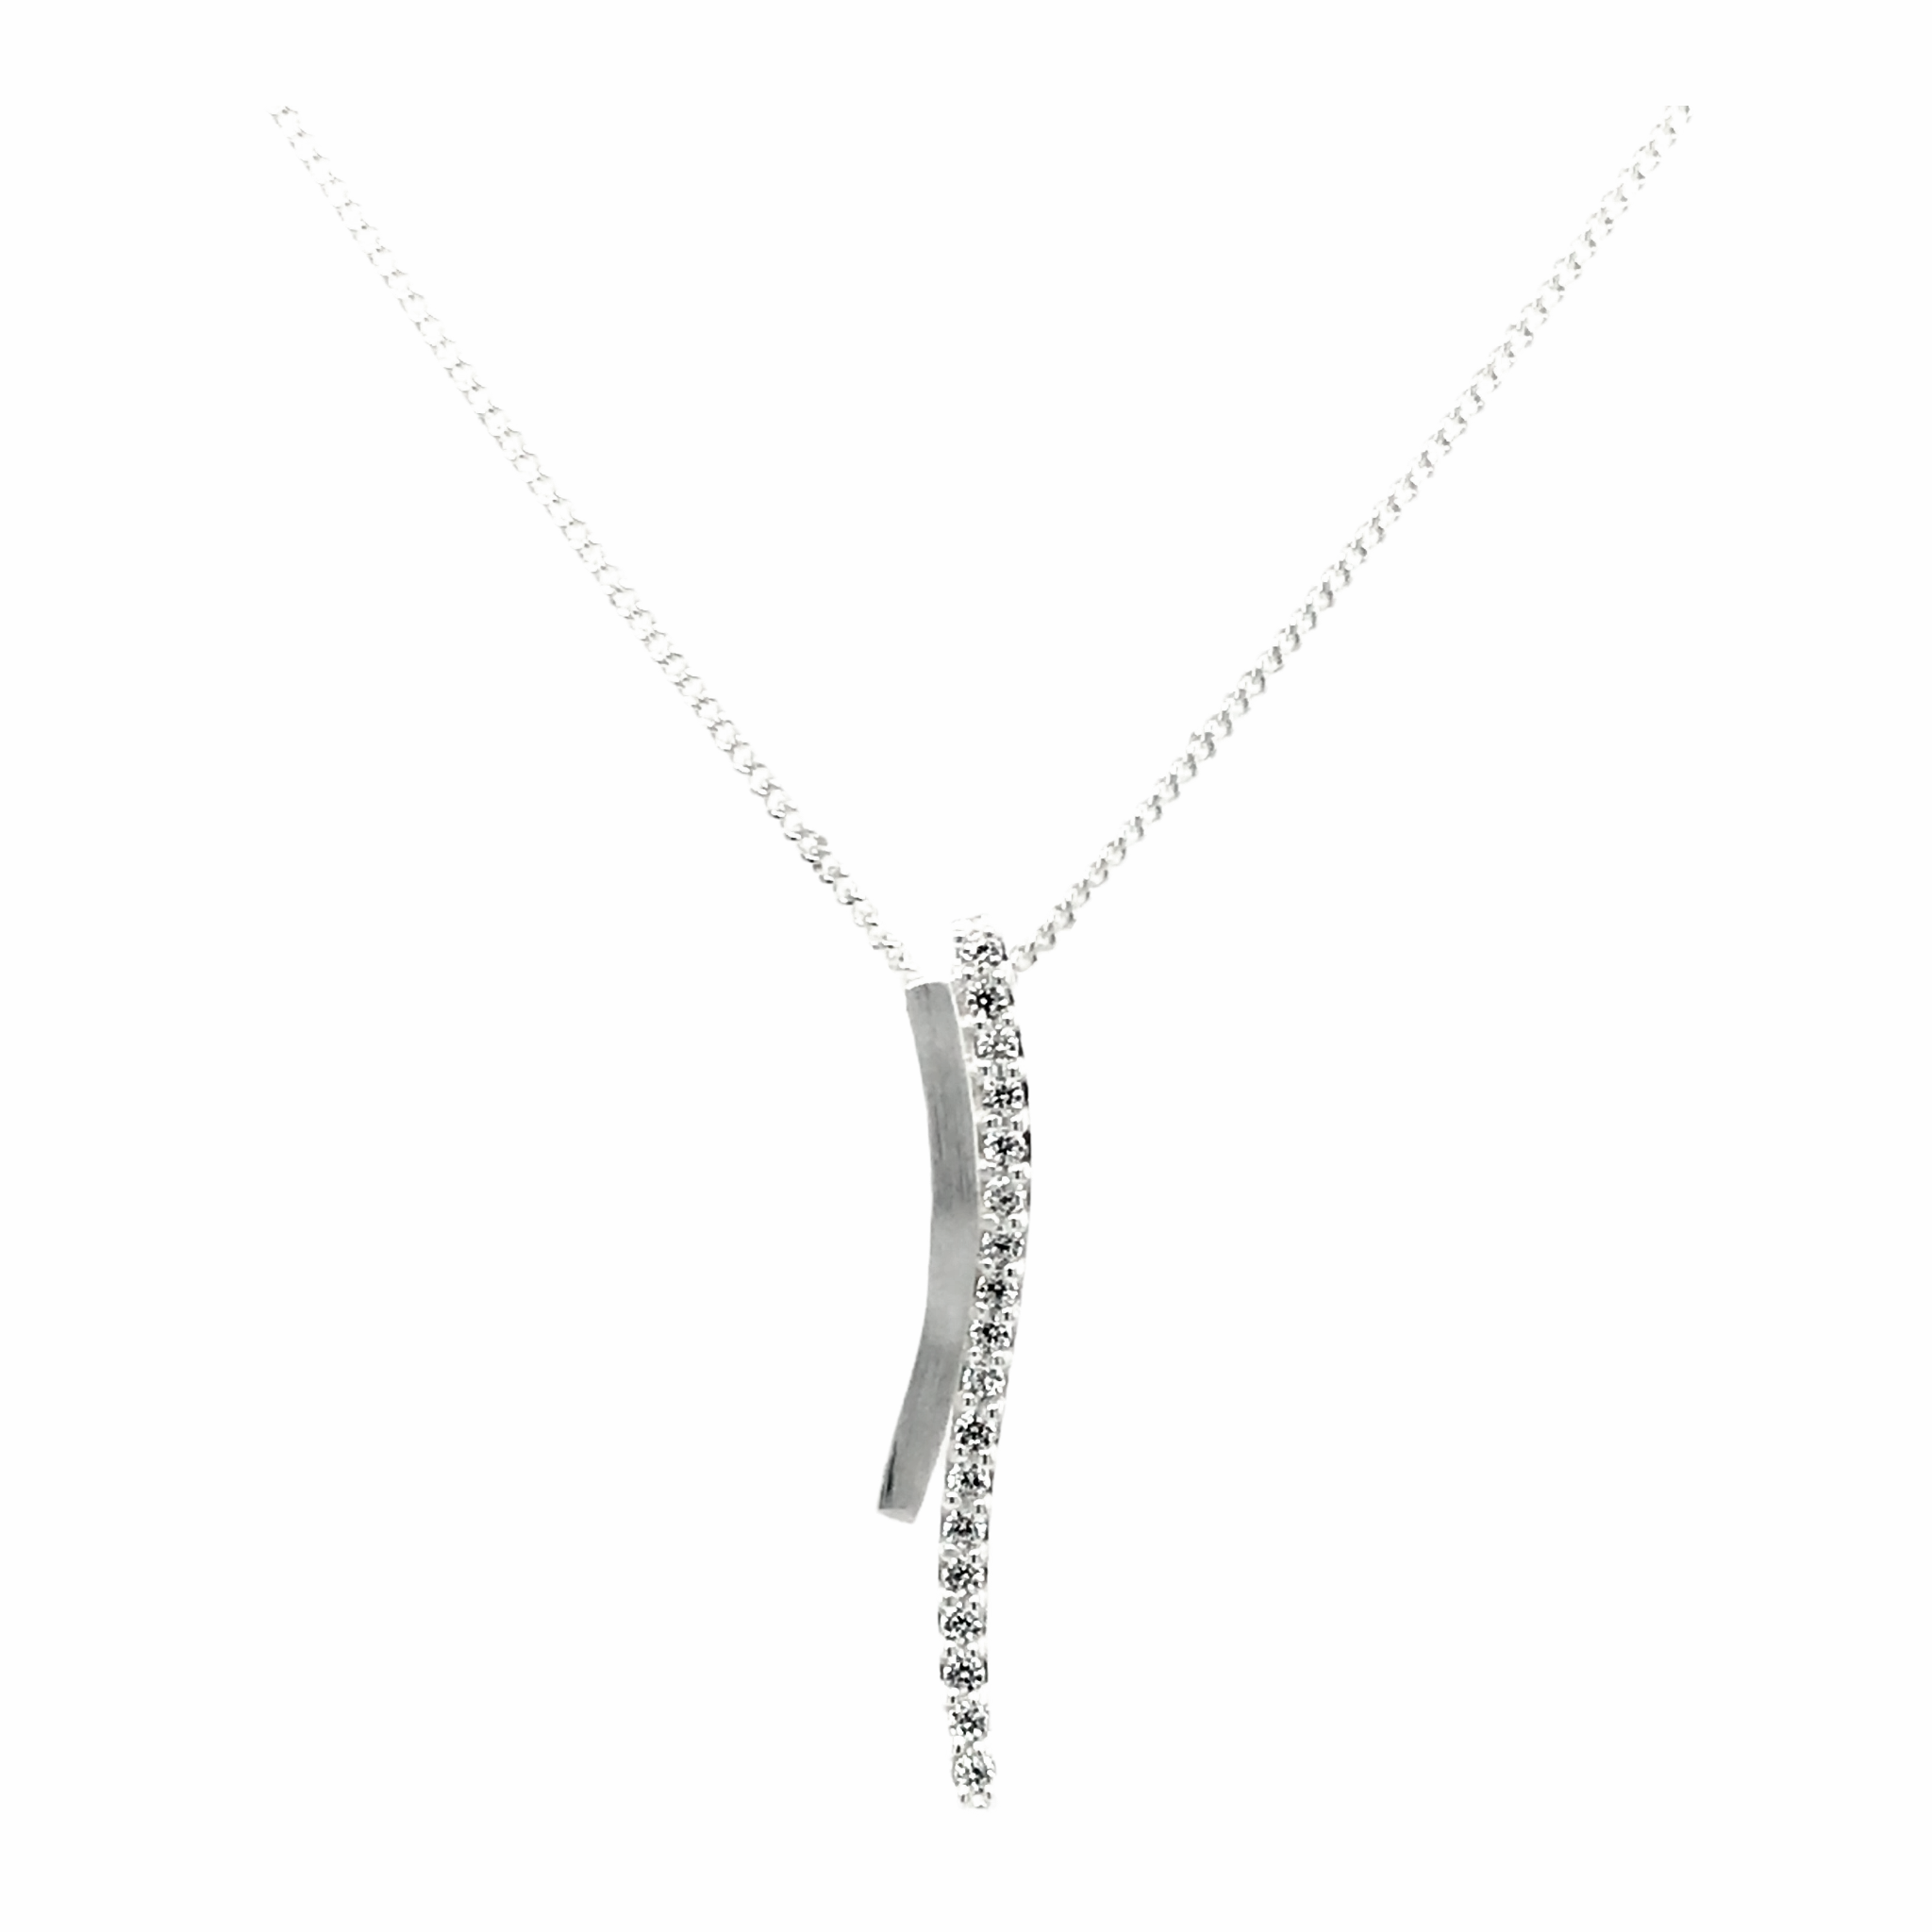 Silver CZ Double Curved Bars Pendant on Chain